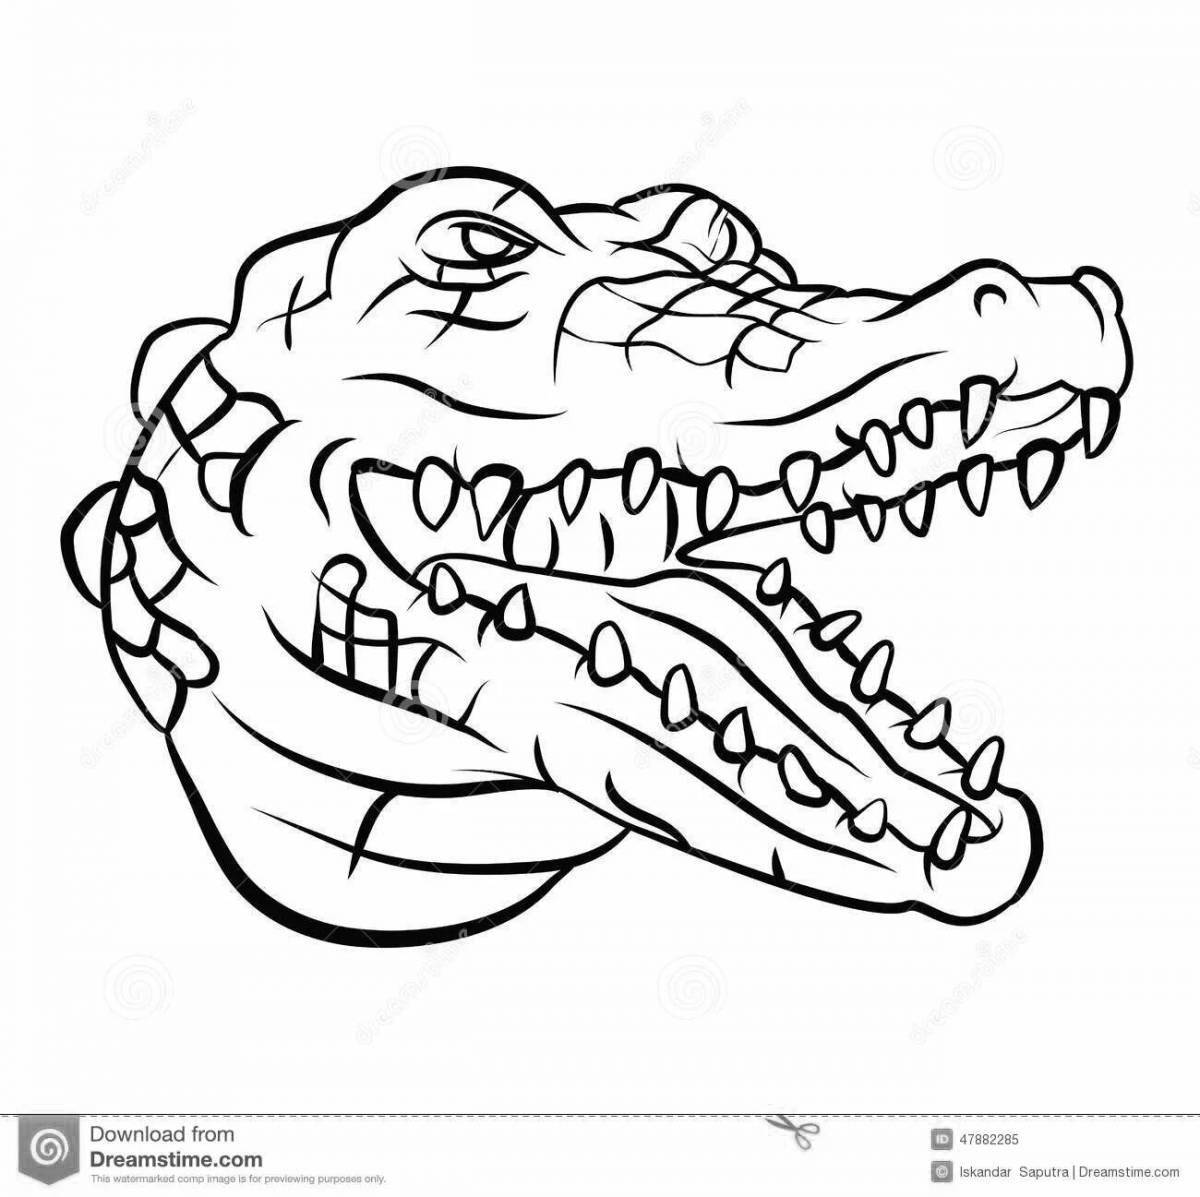 Exciting coloring crocodile mask